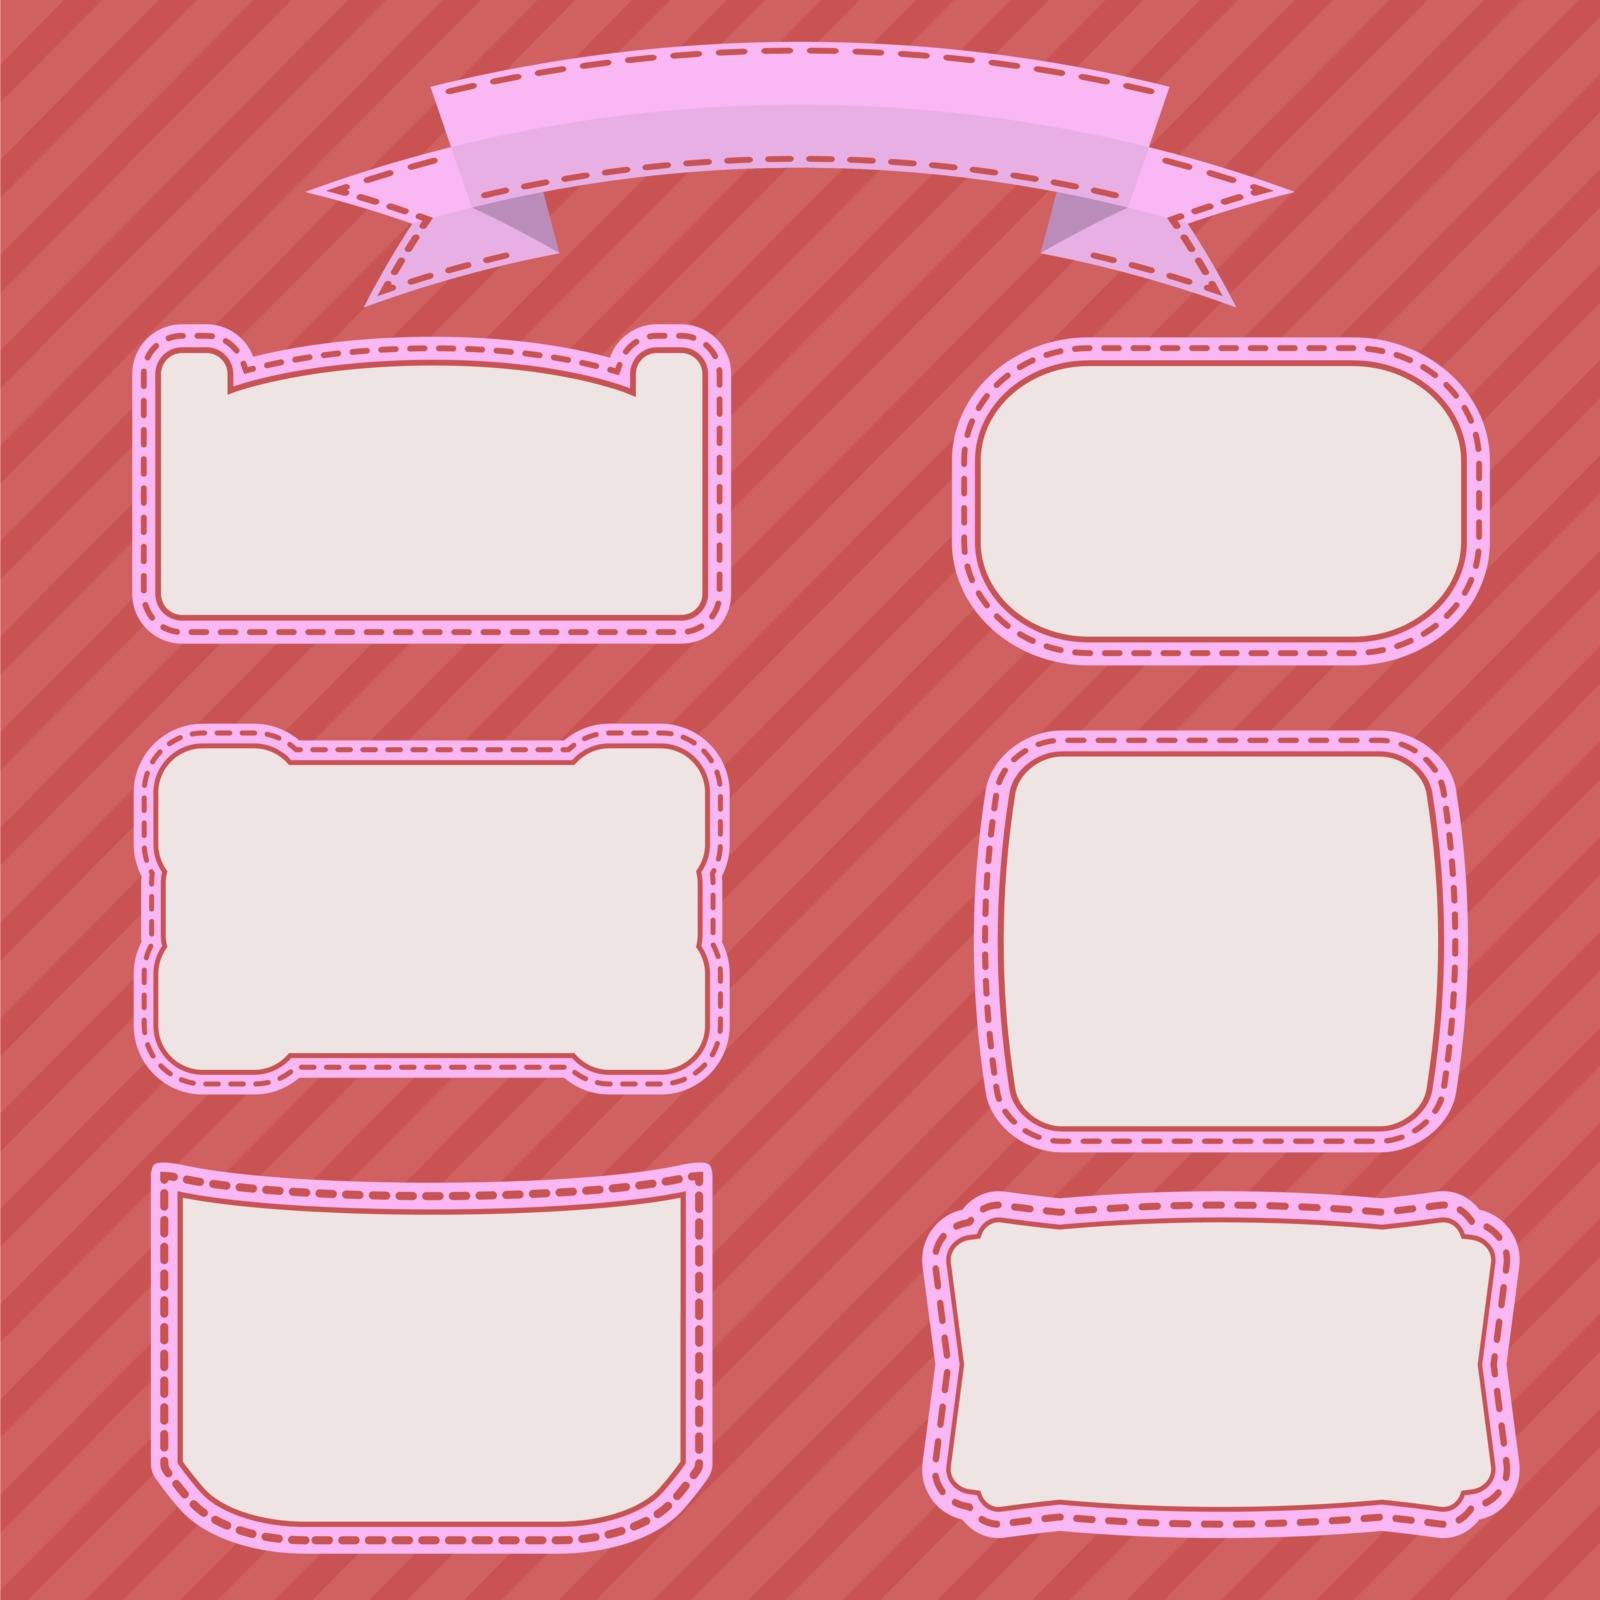 Vector illustration of beautiful white frame on a pink background